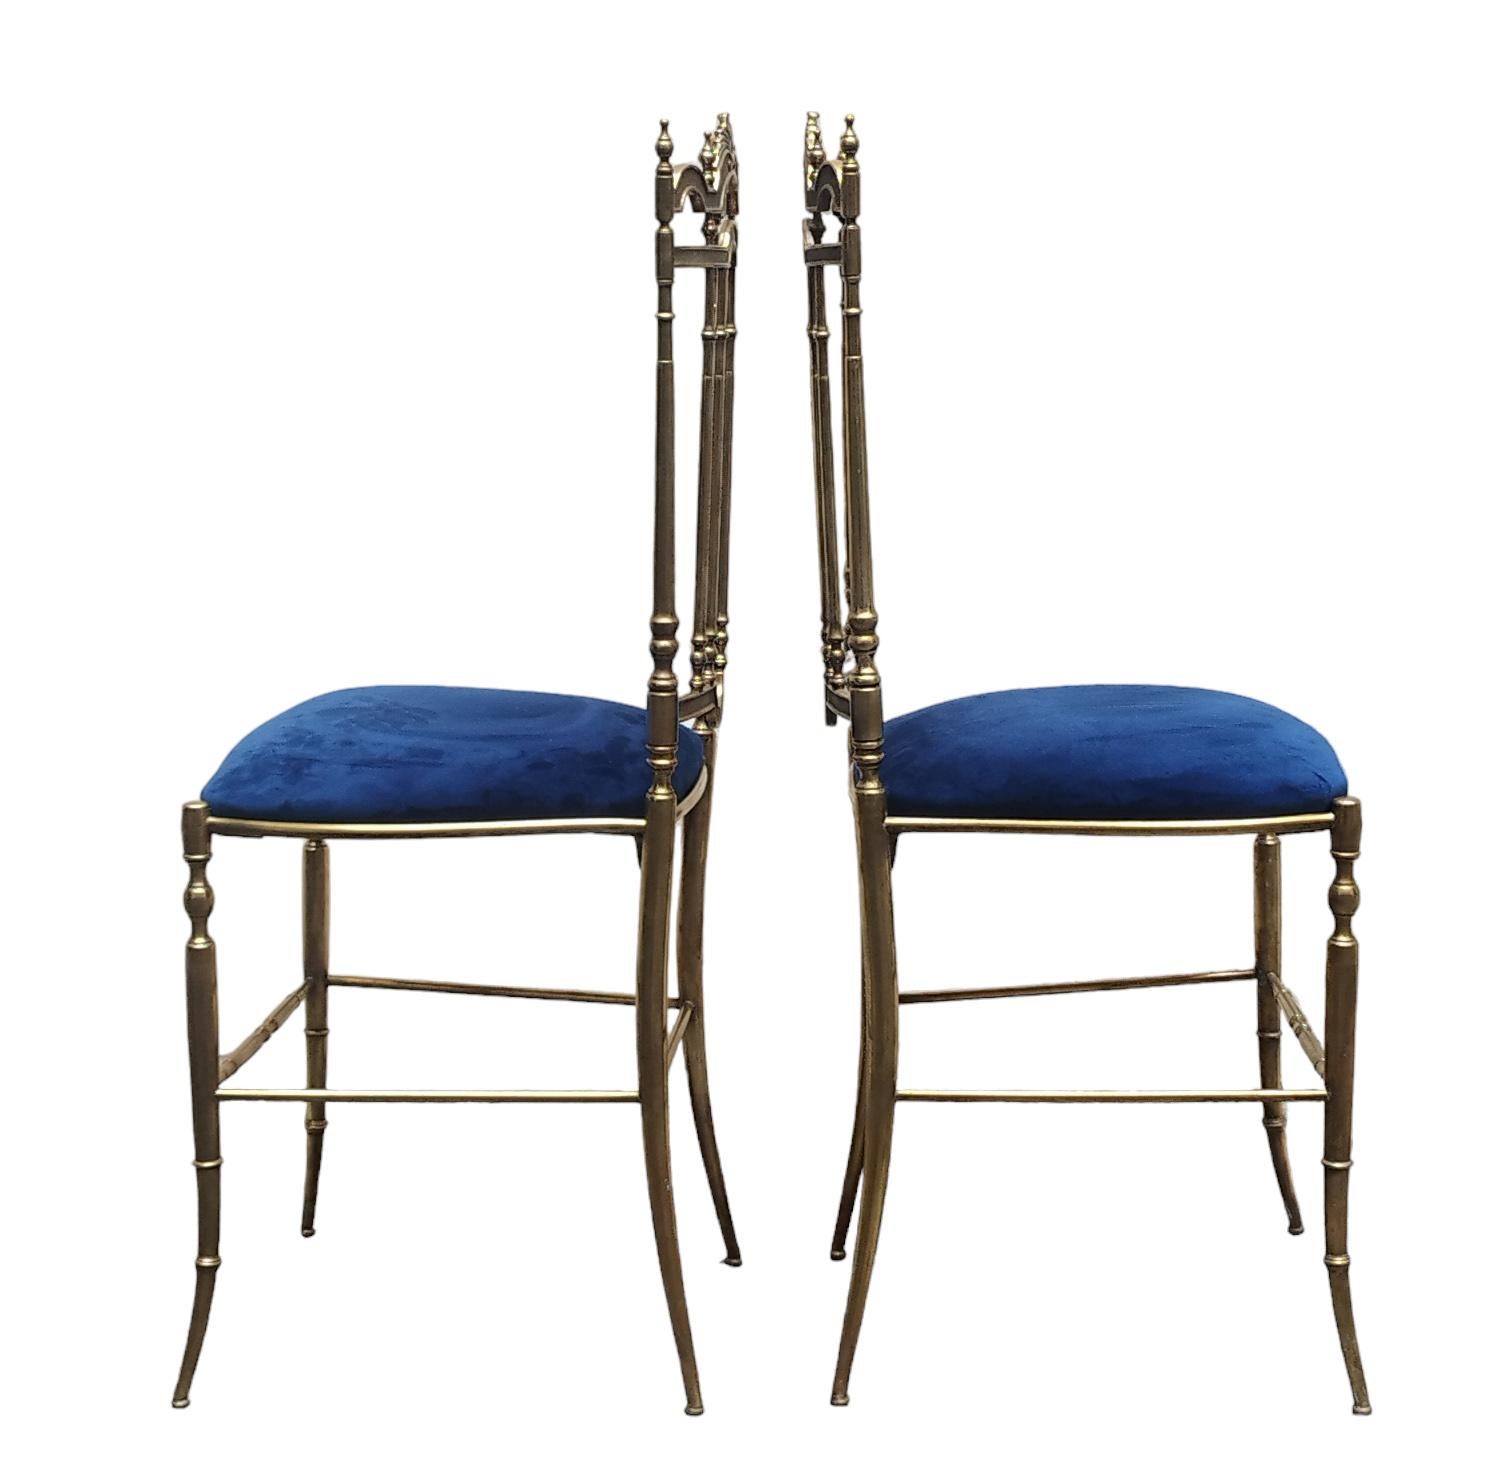 Italian Pair of Chiavarine He and She Chairs in Brass and Velvet, Italy 1950s